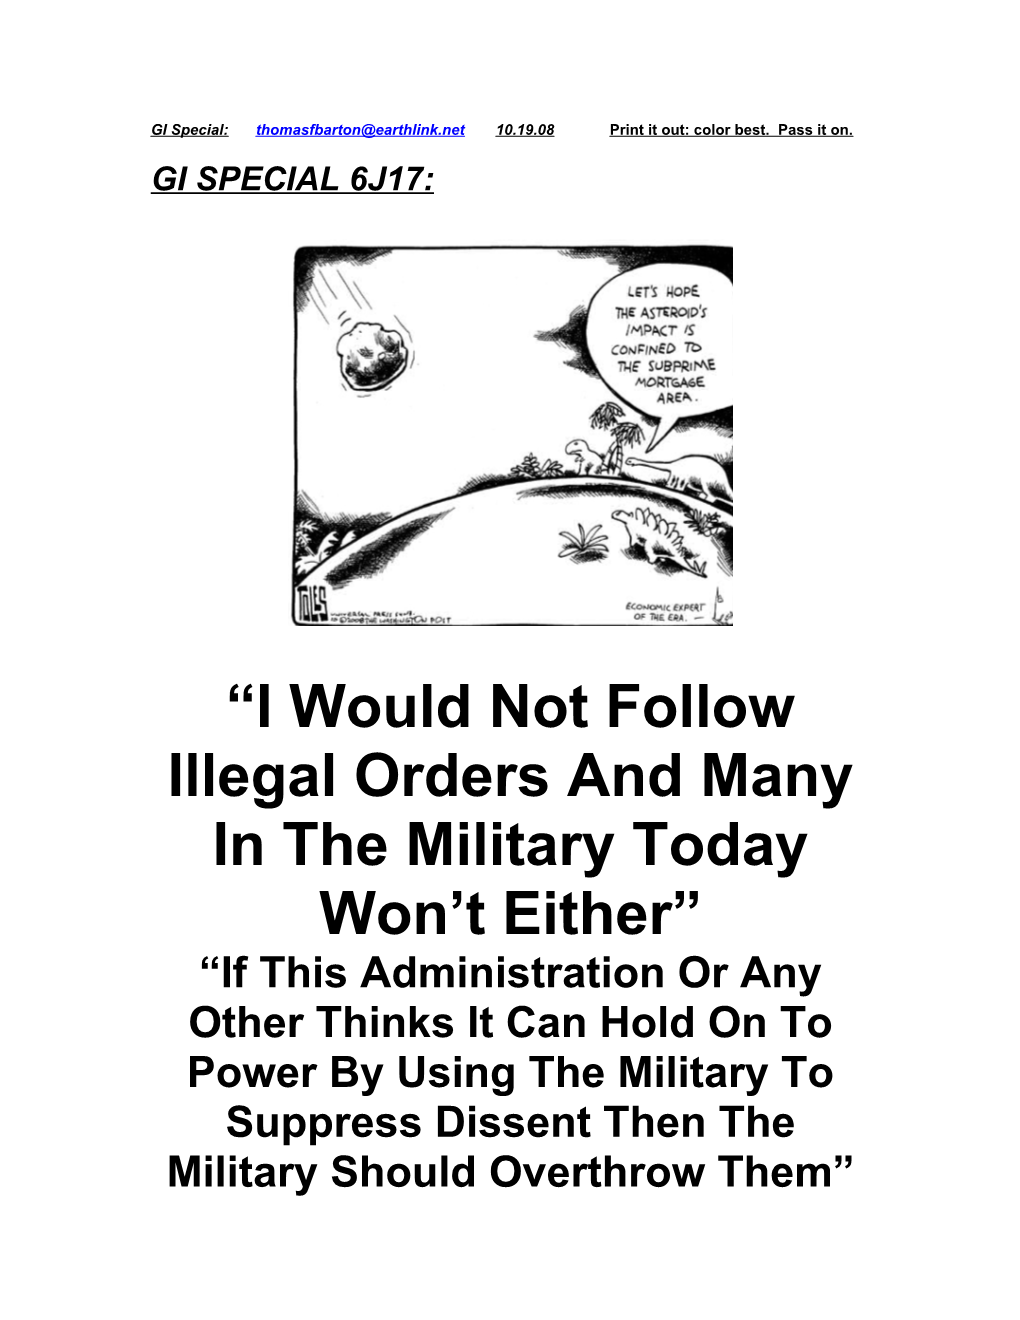 I Would Not Follow Illegal Orders and Many in the Military Today Won T Either